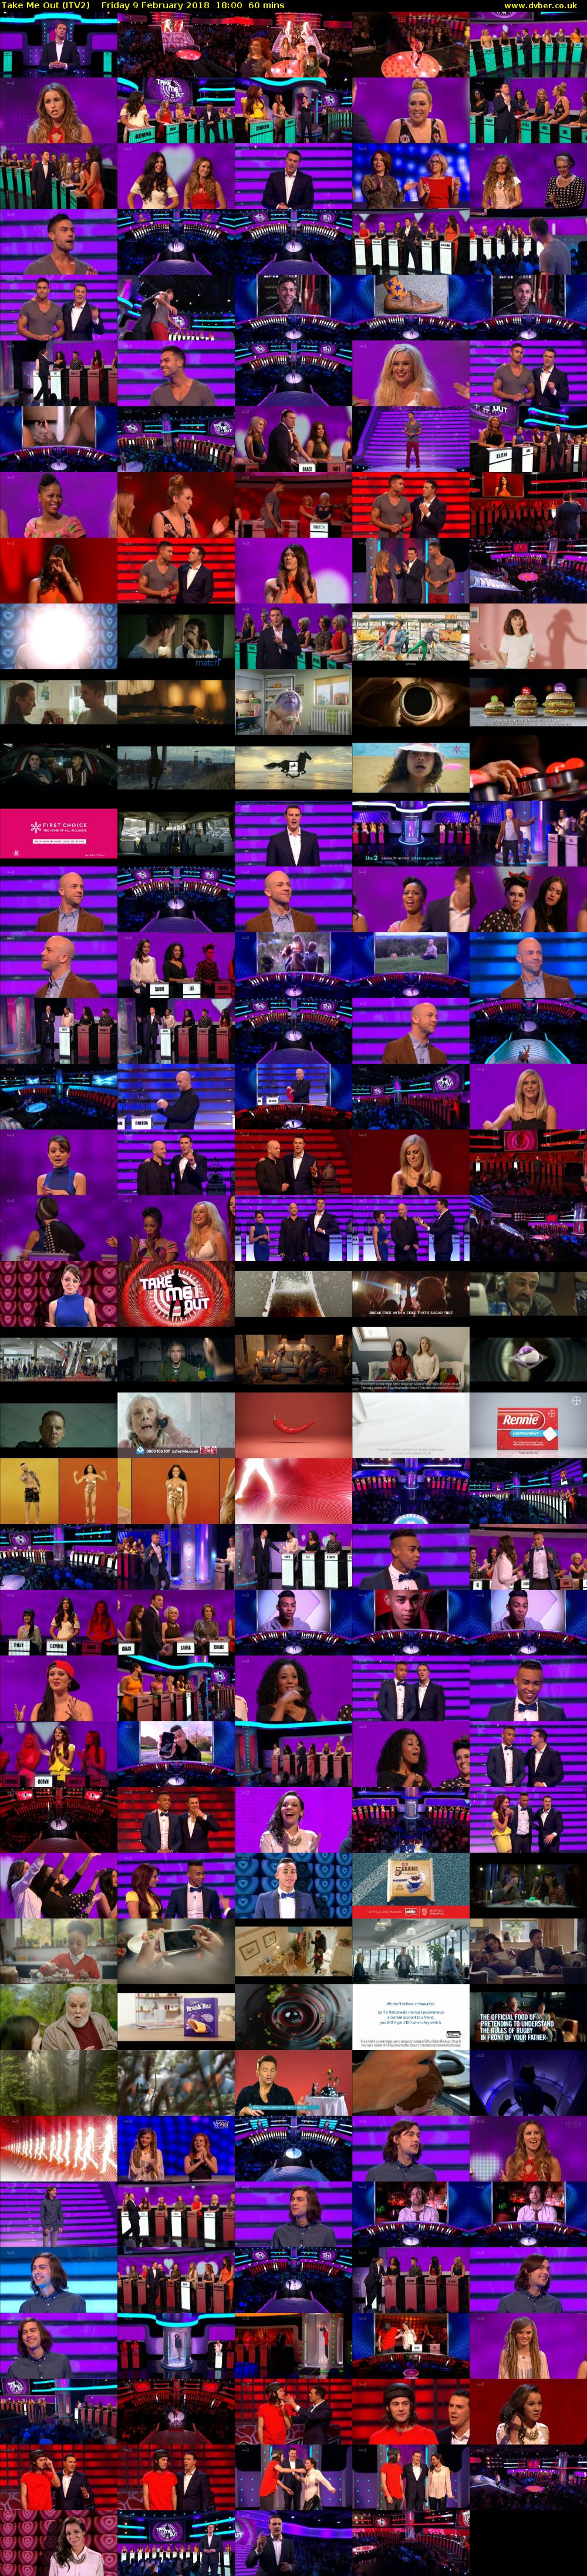 Take Me Out (ITV2) Friday 9 February 2018 18:00 - 19:00